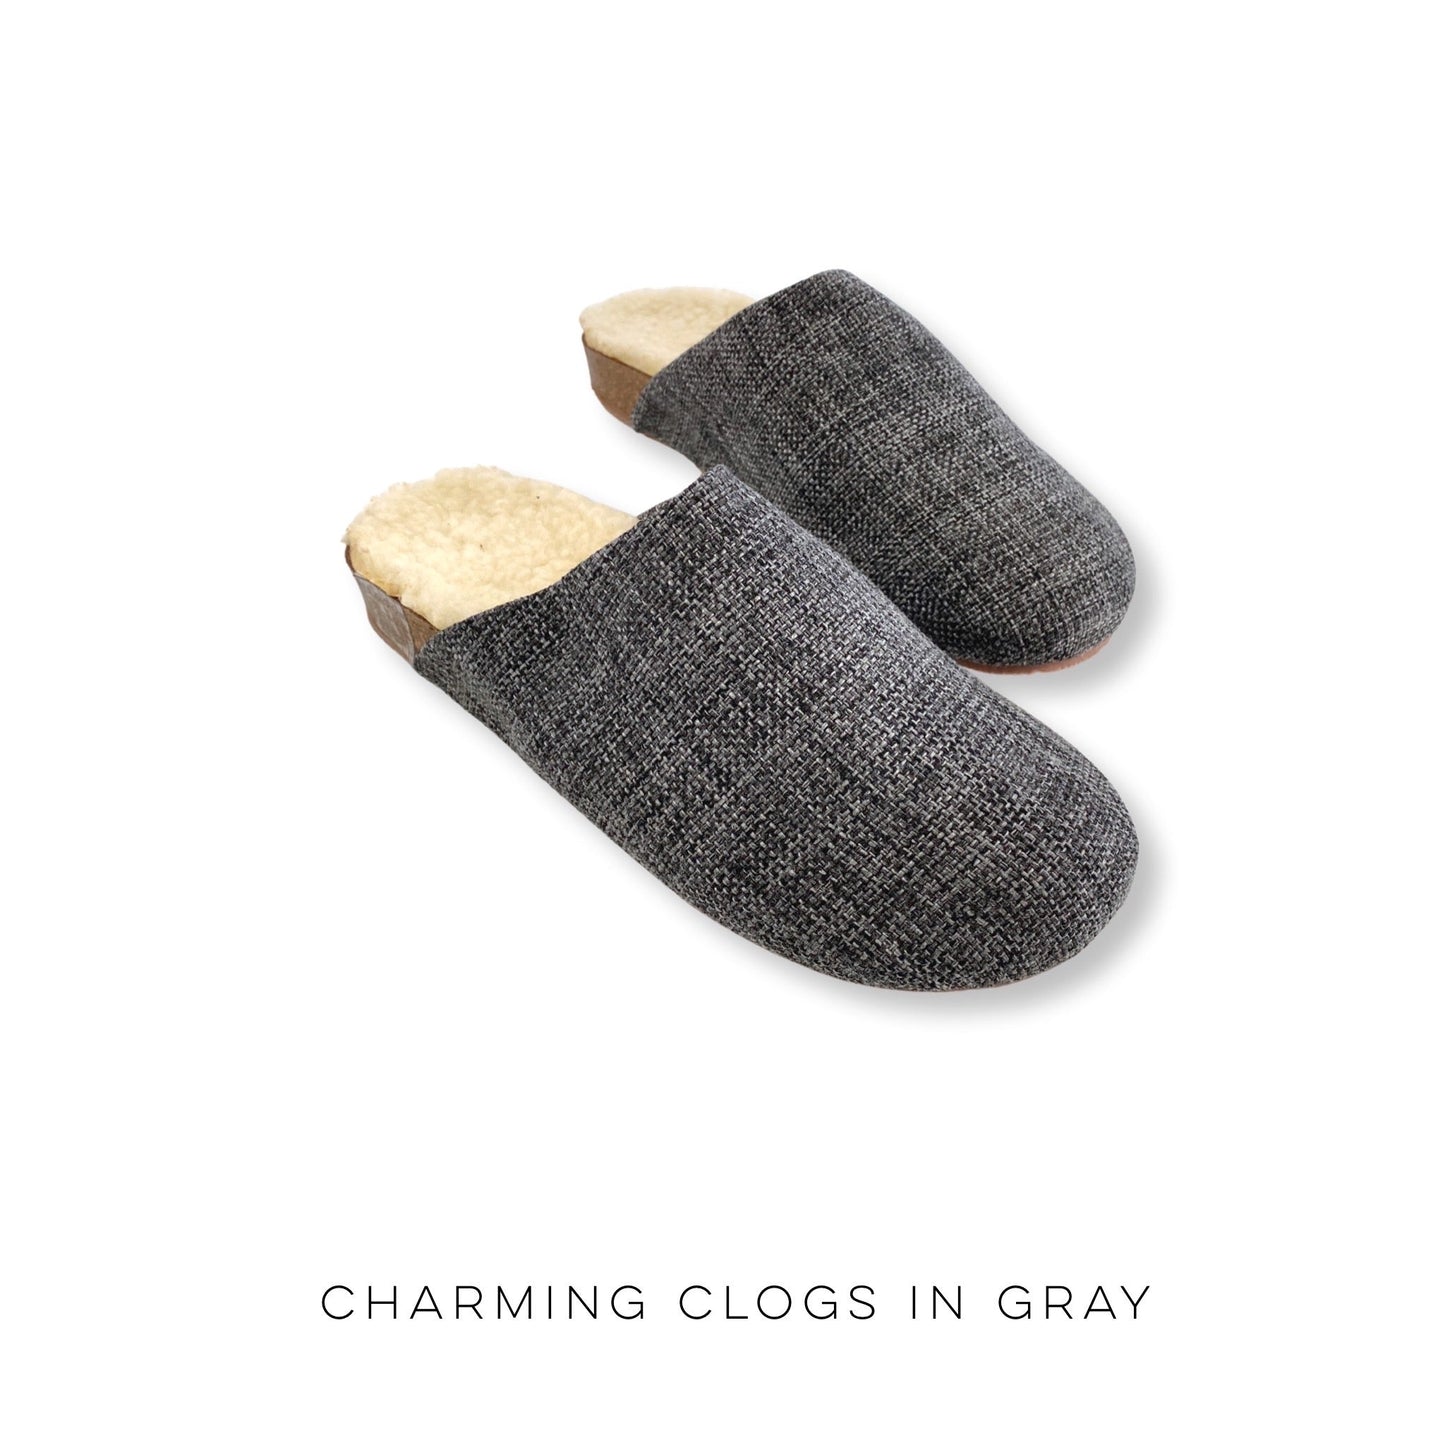 Charming Clogs in Gray